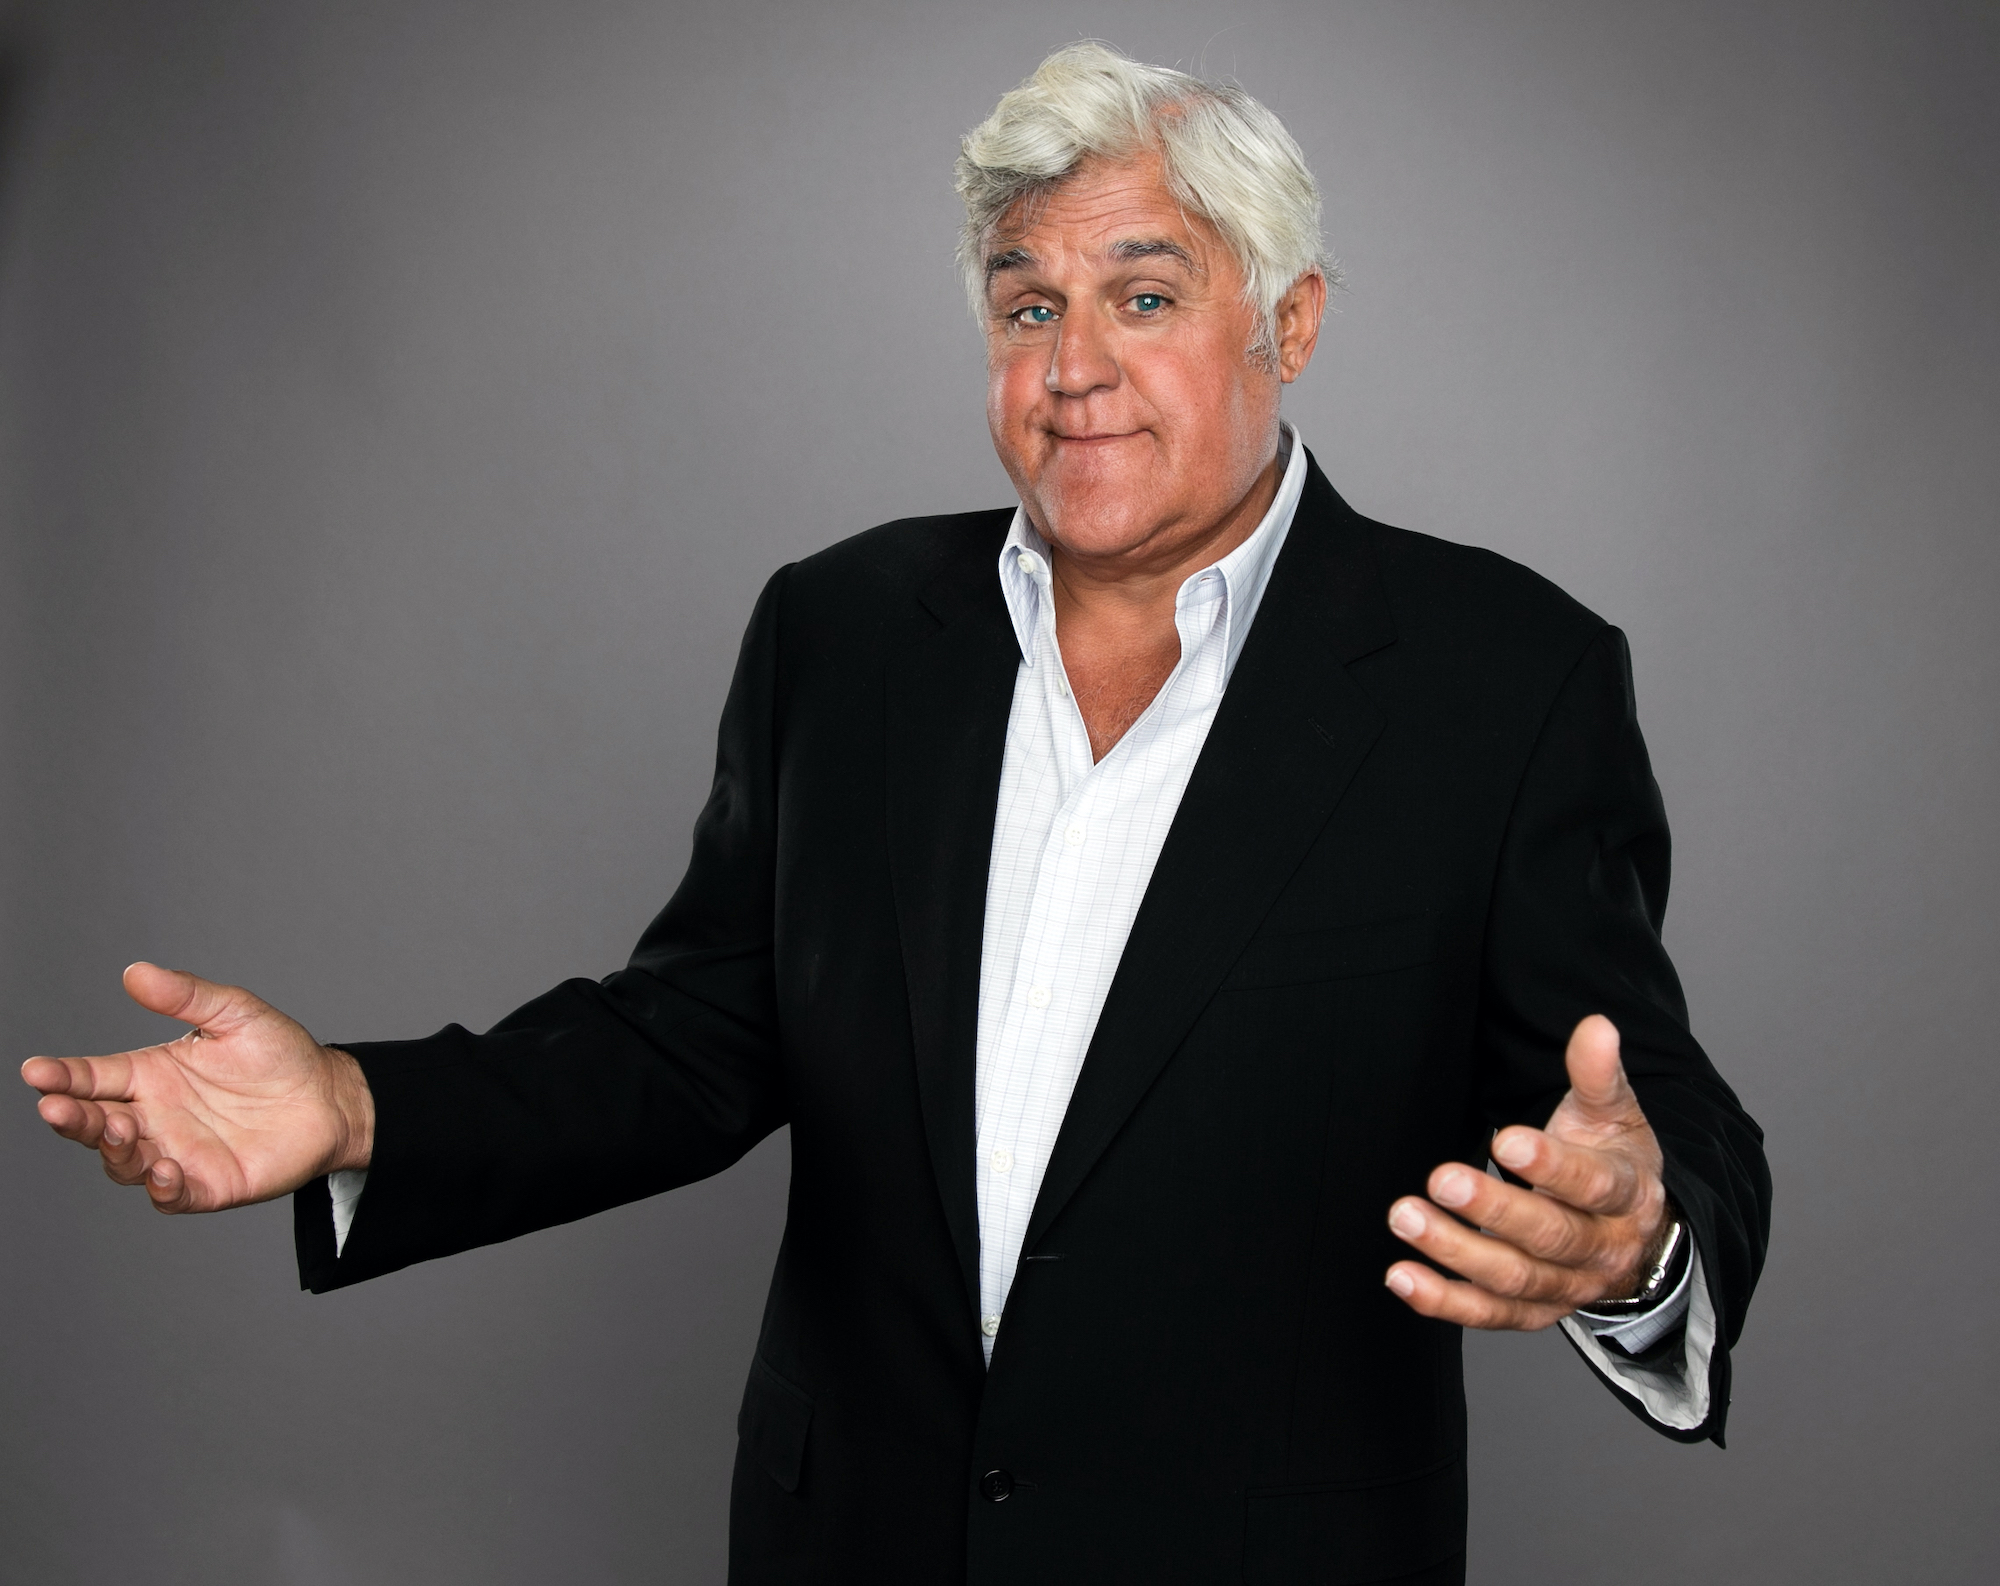 Jay Leno shrugging in front of a gray background